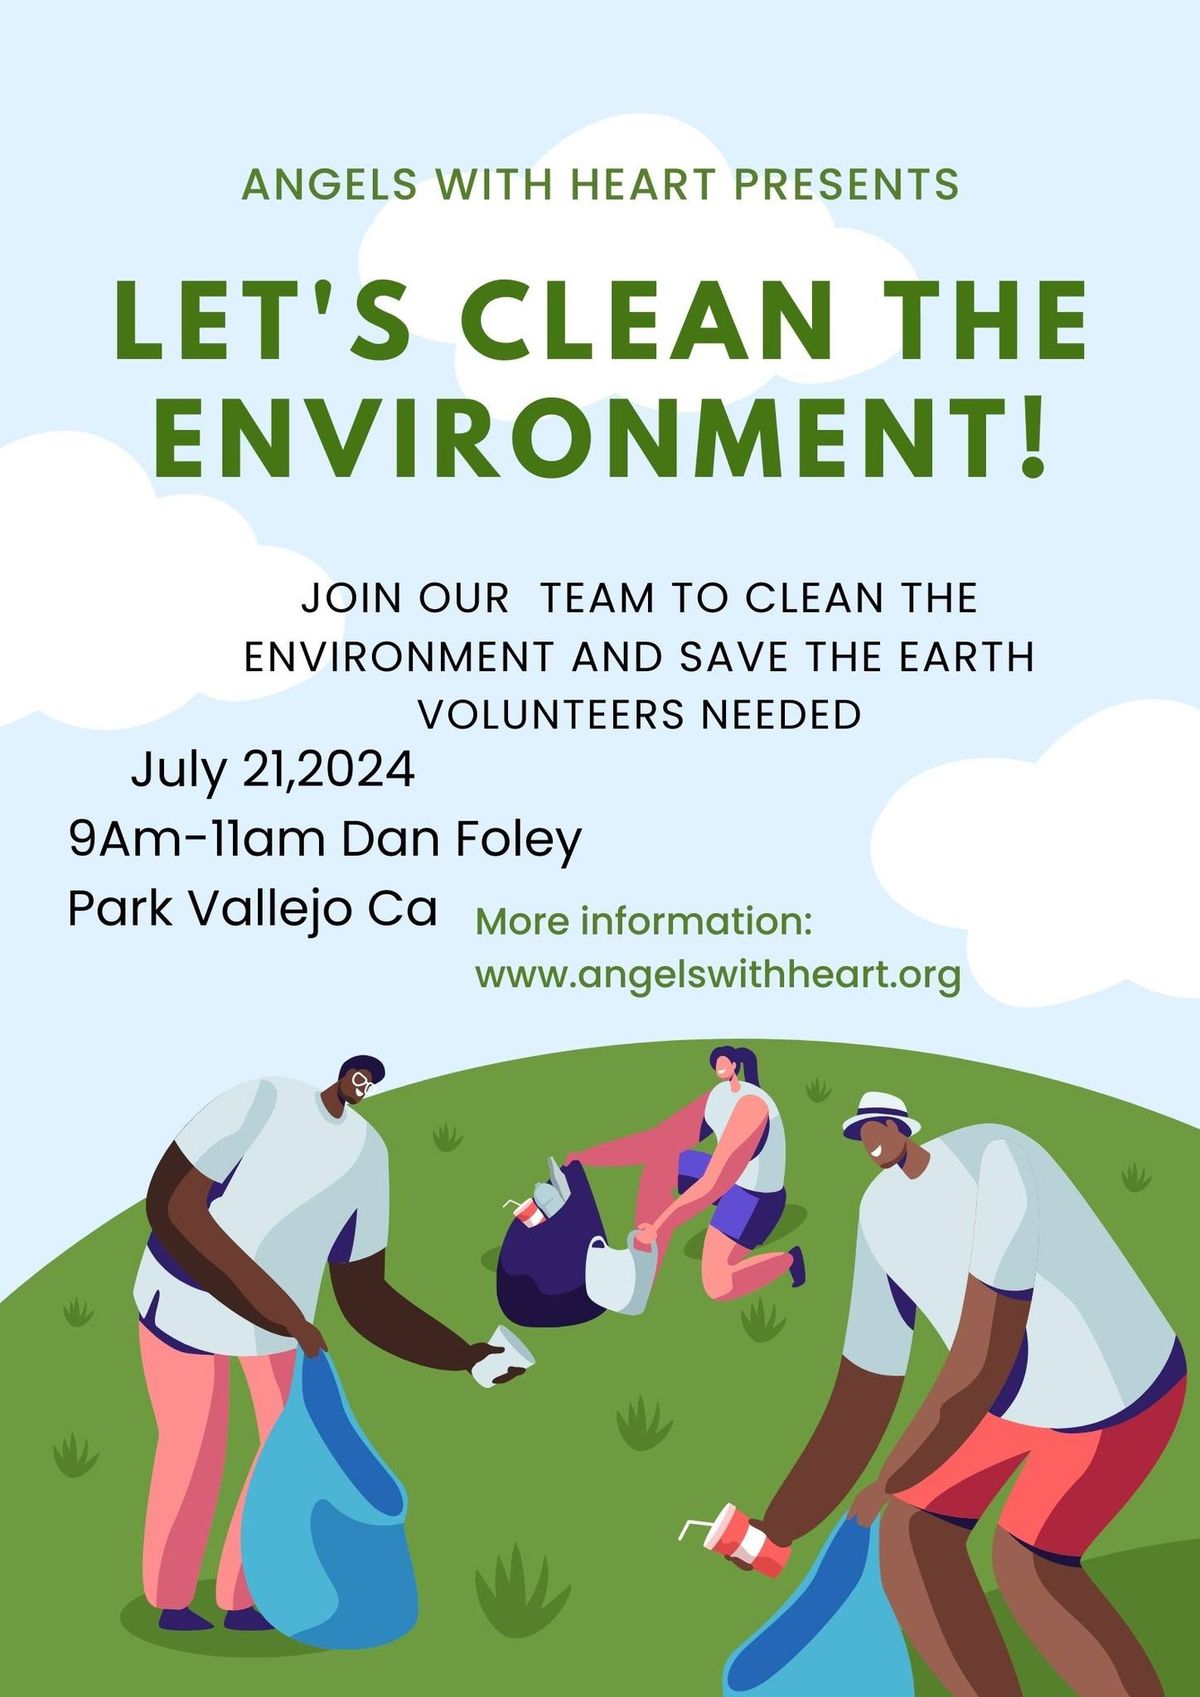 Let's Clean up our environment.